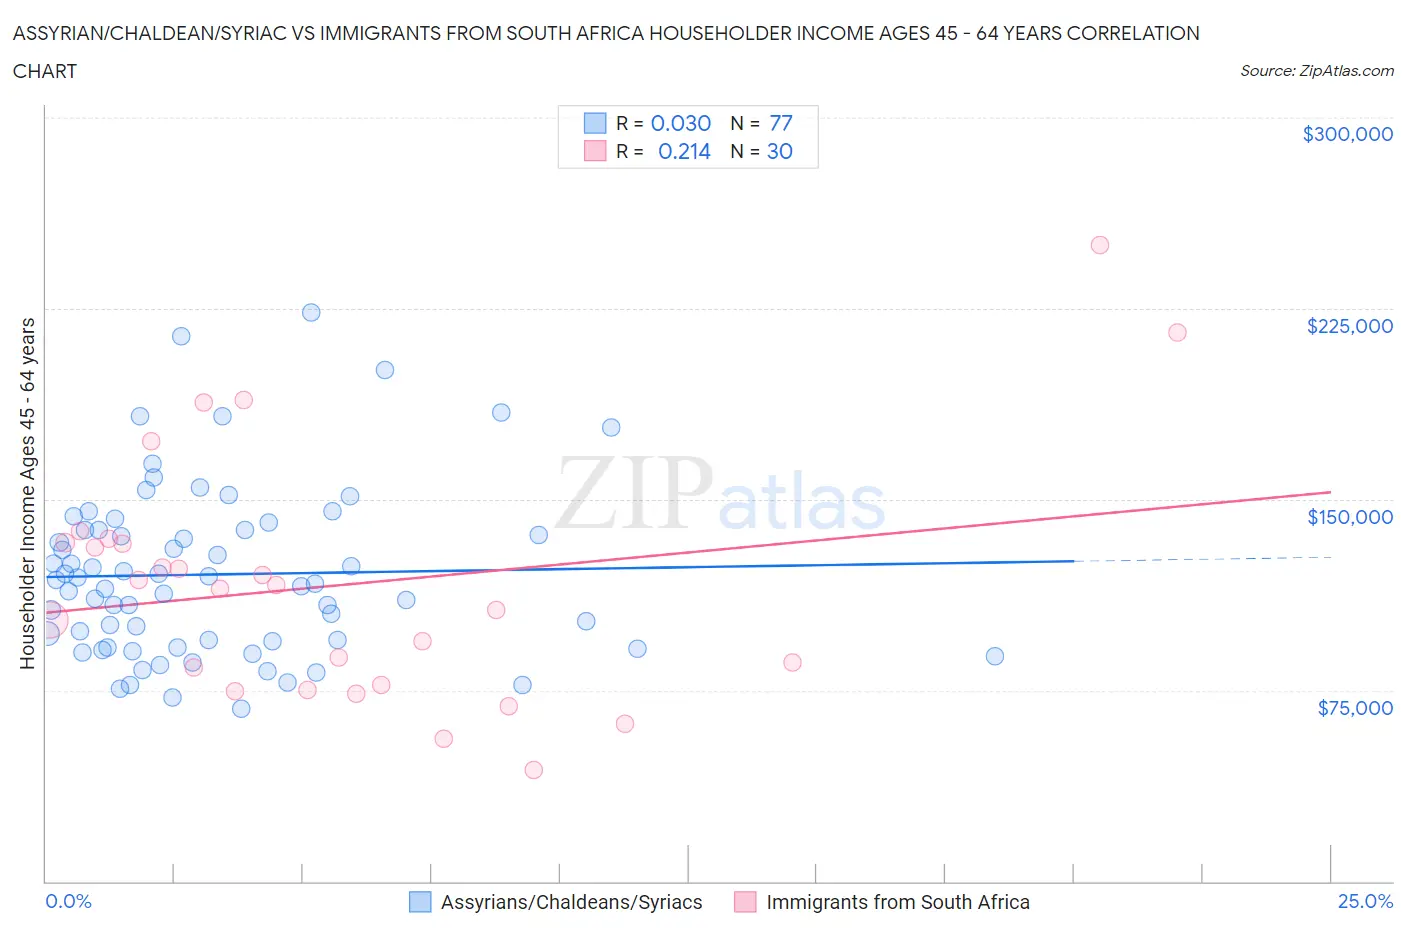 Assyrian/Chaldean/Syriac vs Immigrants from South Africa Householder Income Ages 45 - 64 years